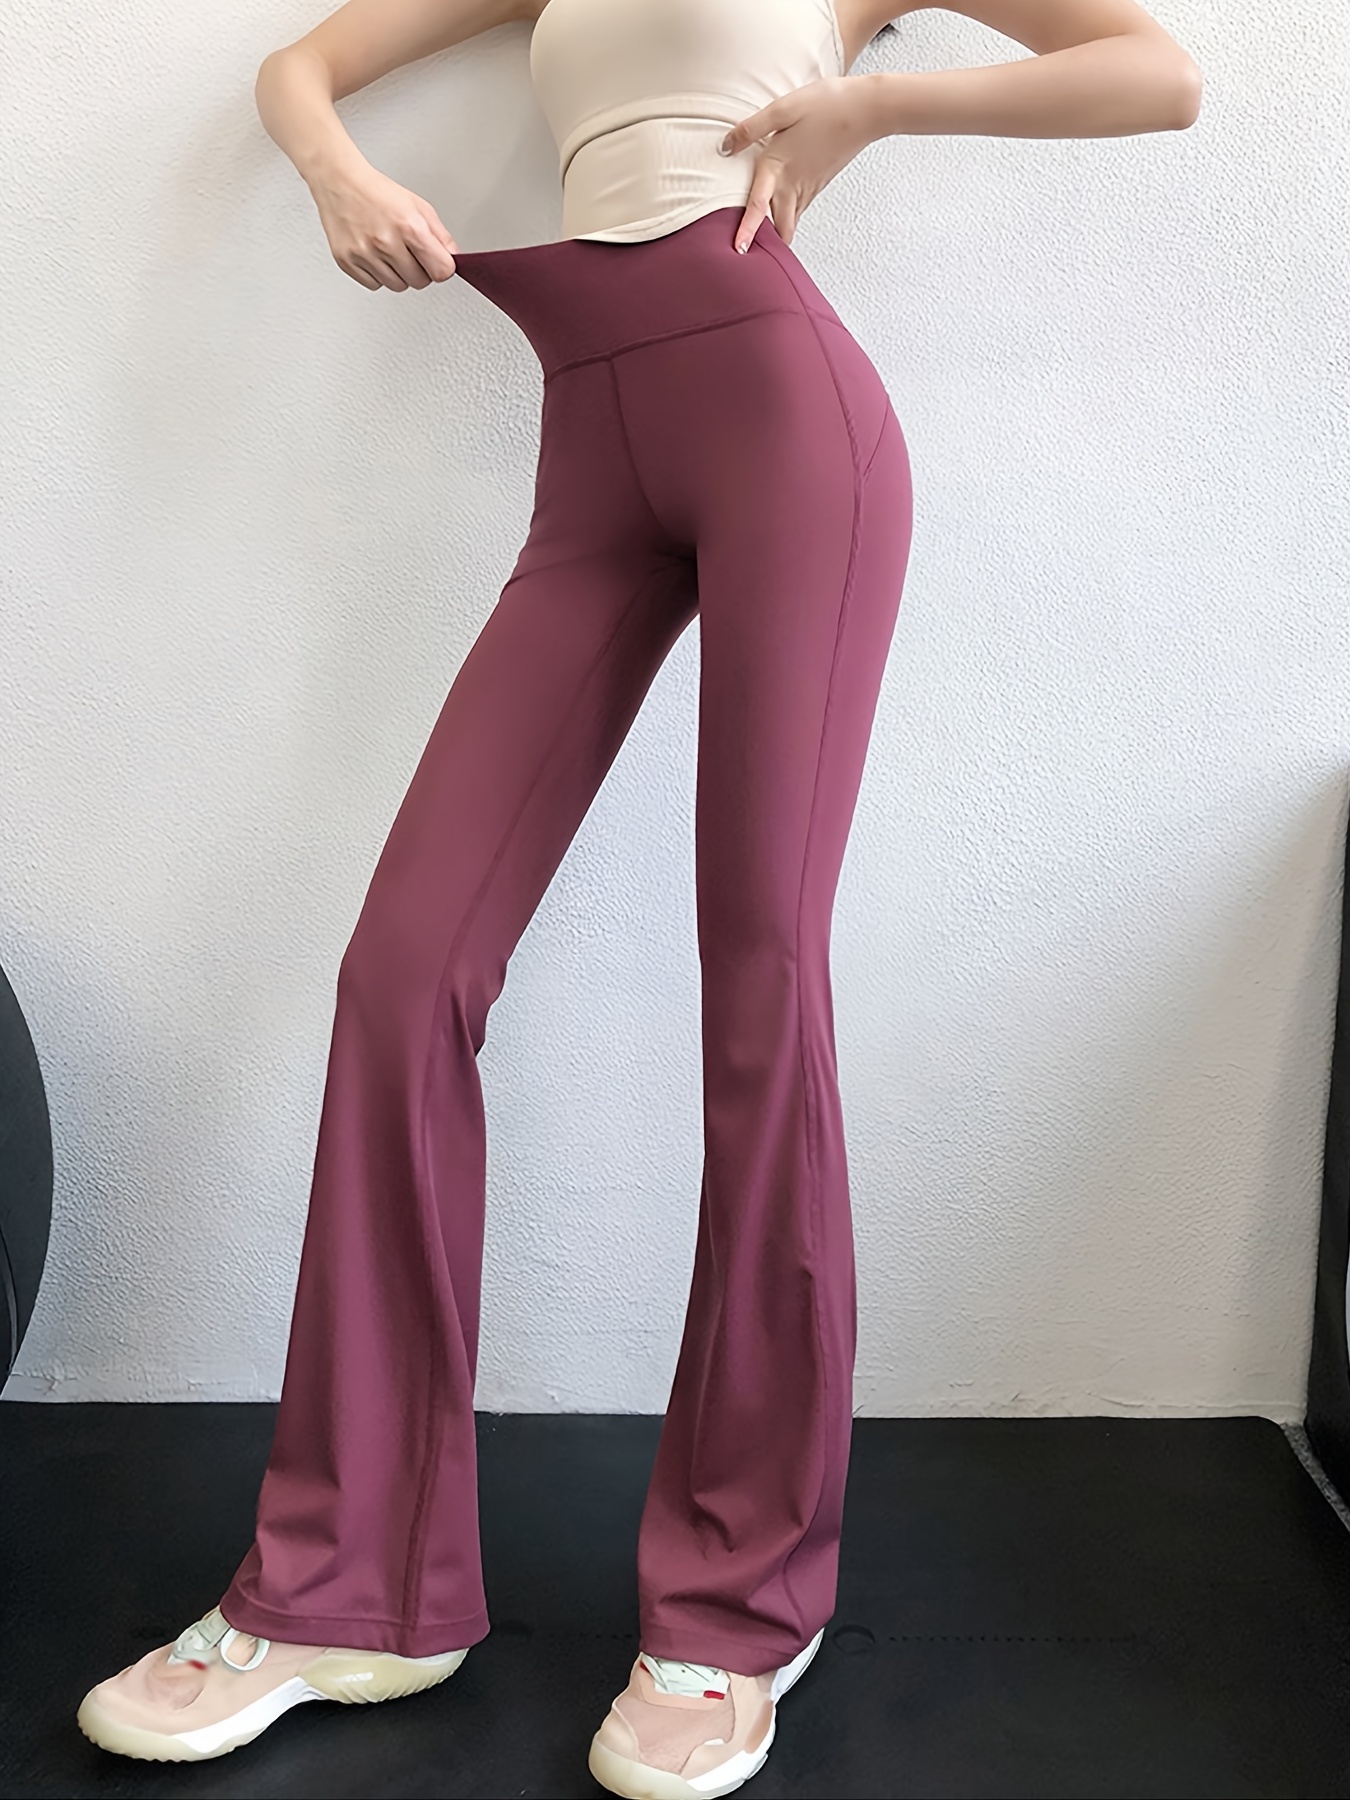 Womens Flare Bootcut Yoga Pants High Waisted Tummy Control Workout Wide Leg  Pants Stretch Athletic Fitness Leggings 